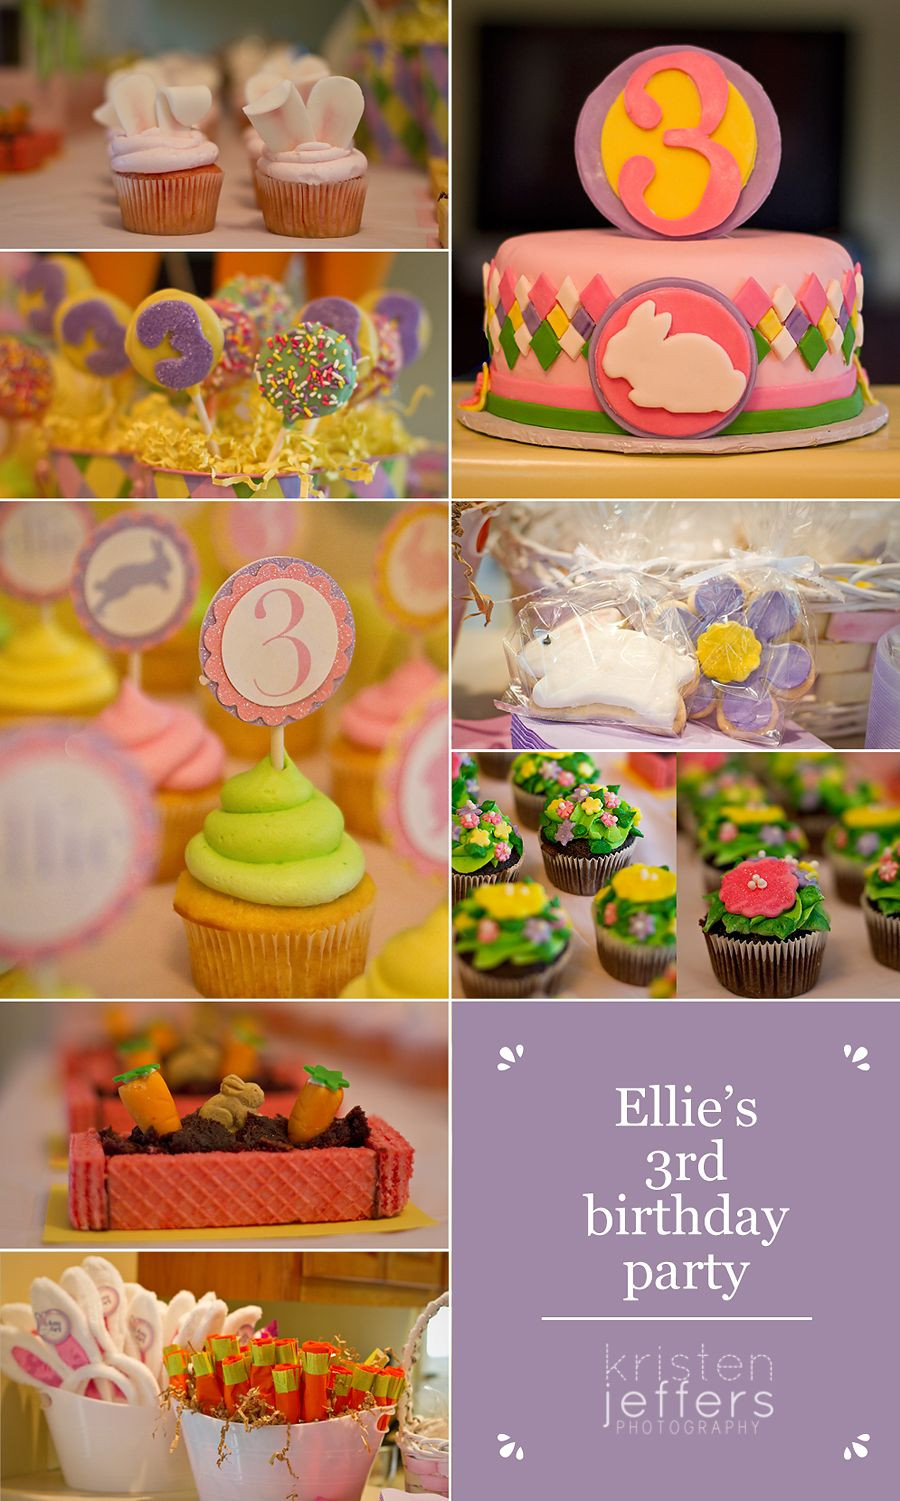 Easter Egg Birthday Party Ideas
 Easter birthday party Rhea Burns if we ever decide to